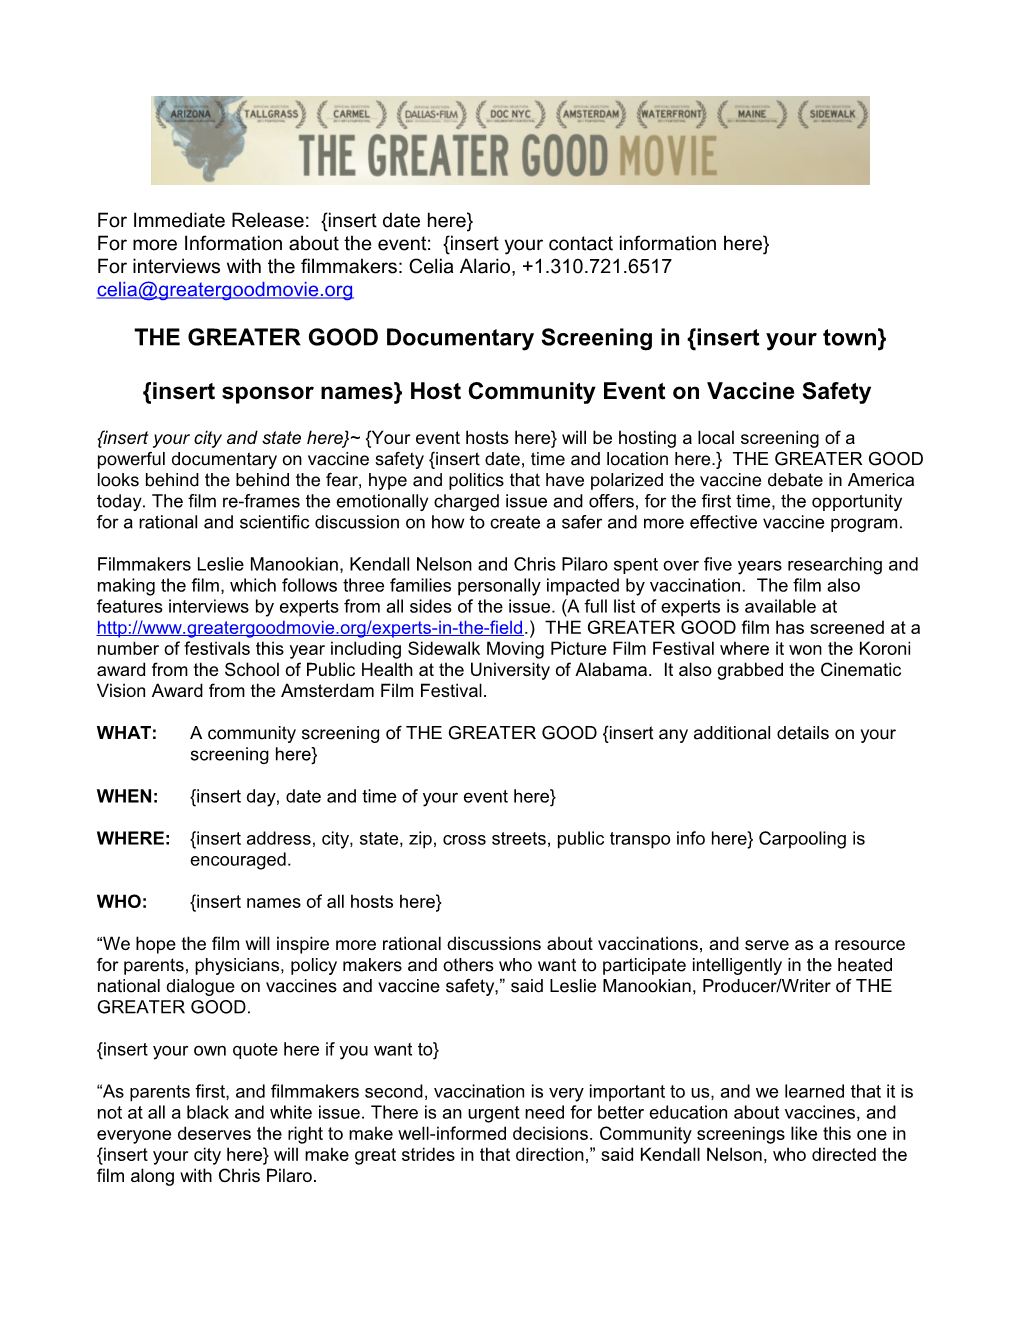 THE GREATER GOOD Documentary Screening in Insert Your Town